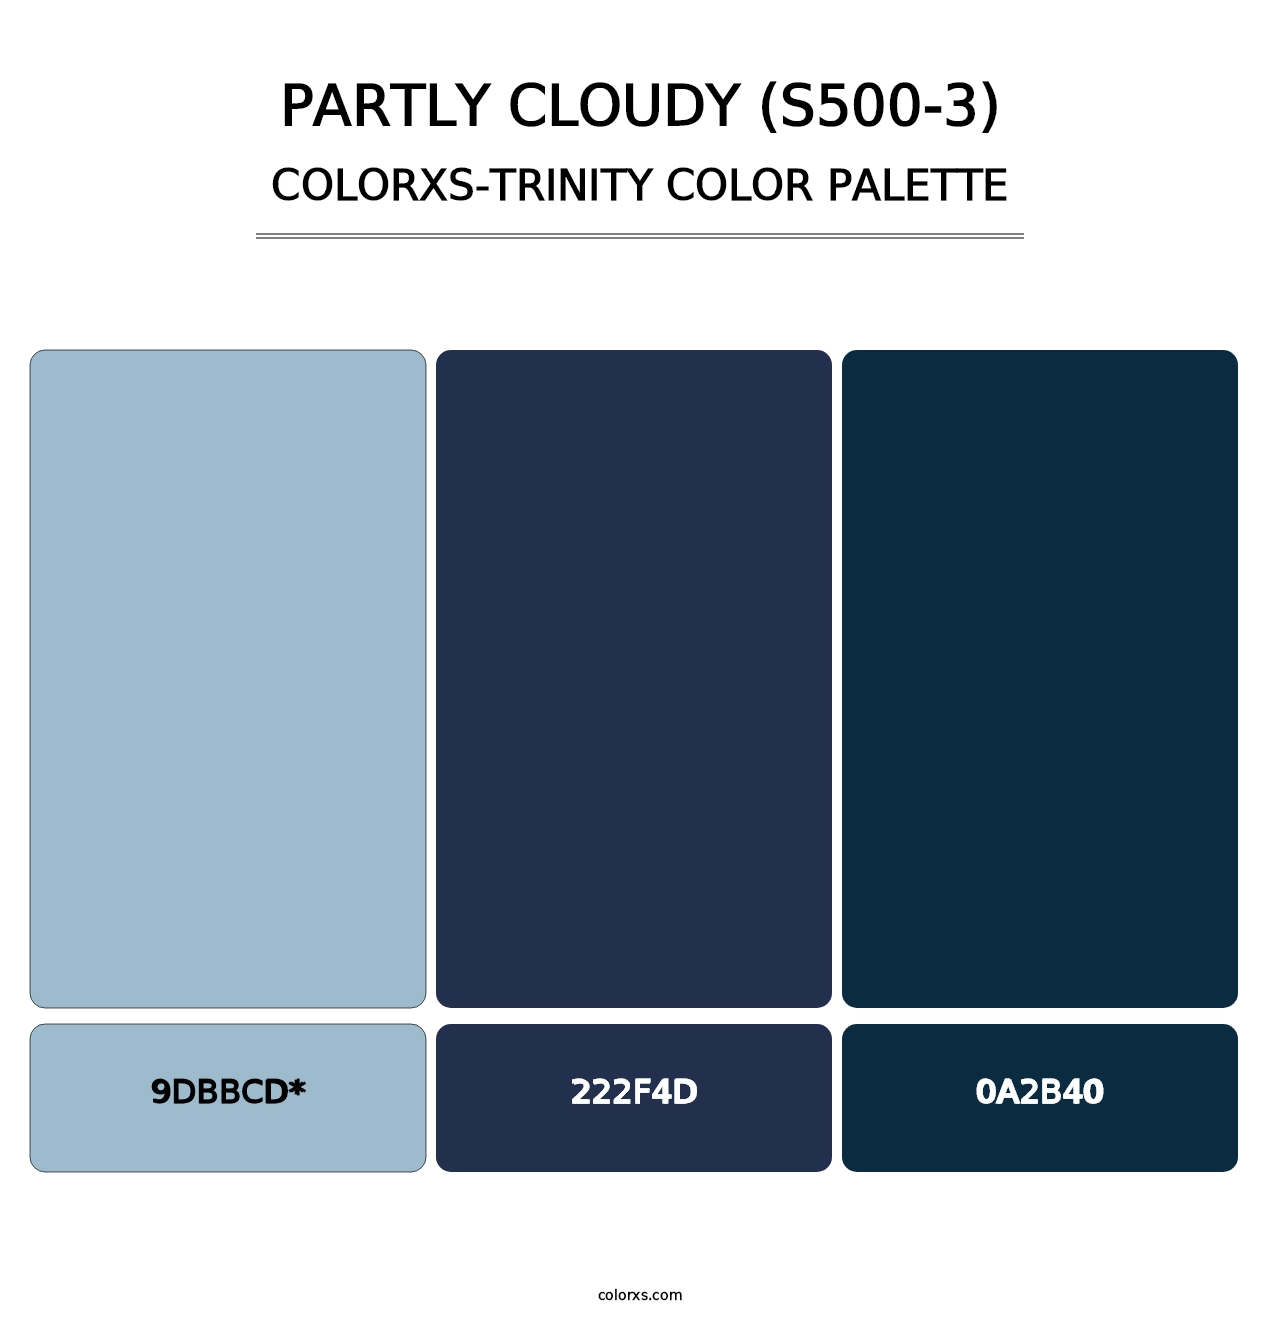 Partly Cloudy (S500-3) - Colorxs Trinity Palette